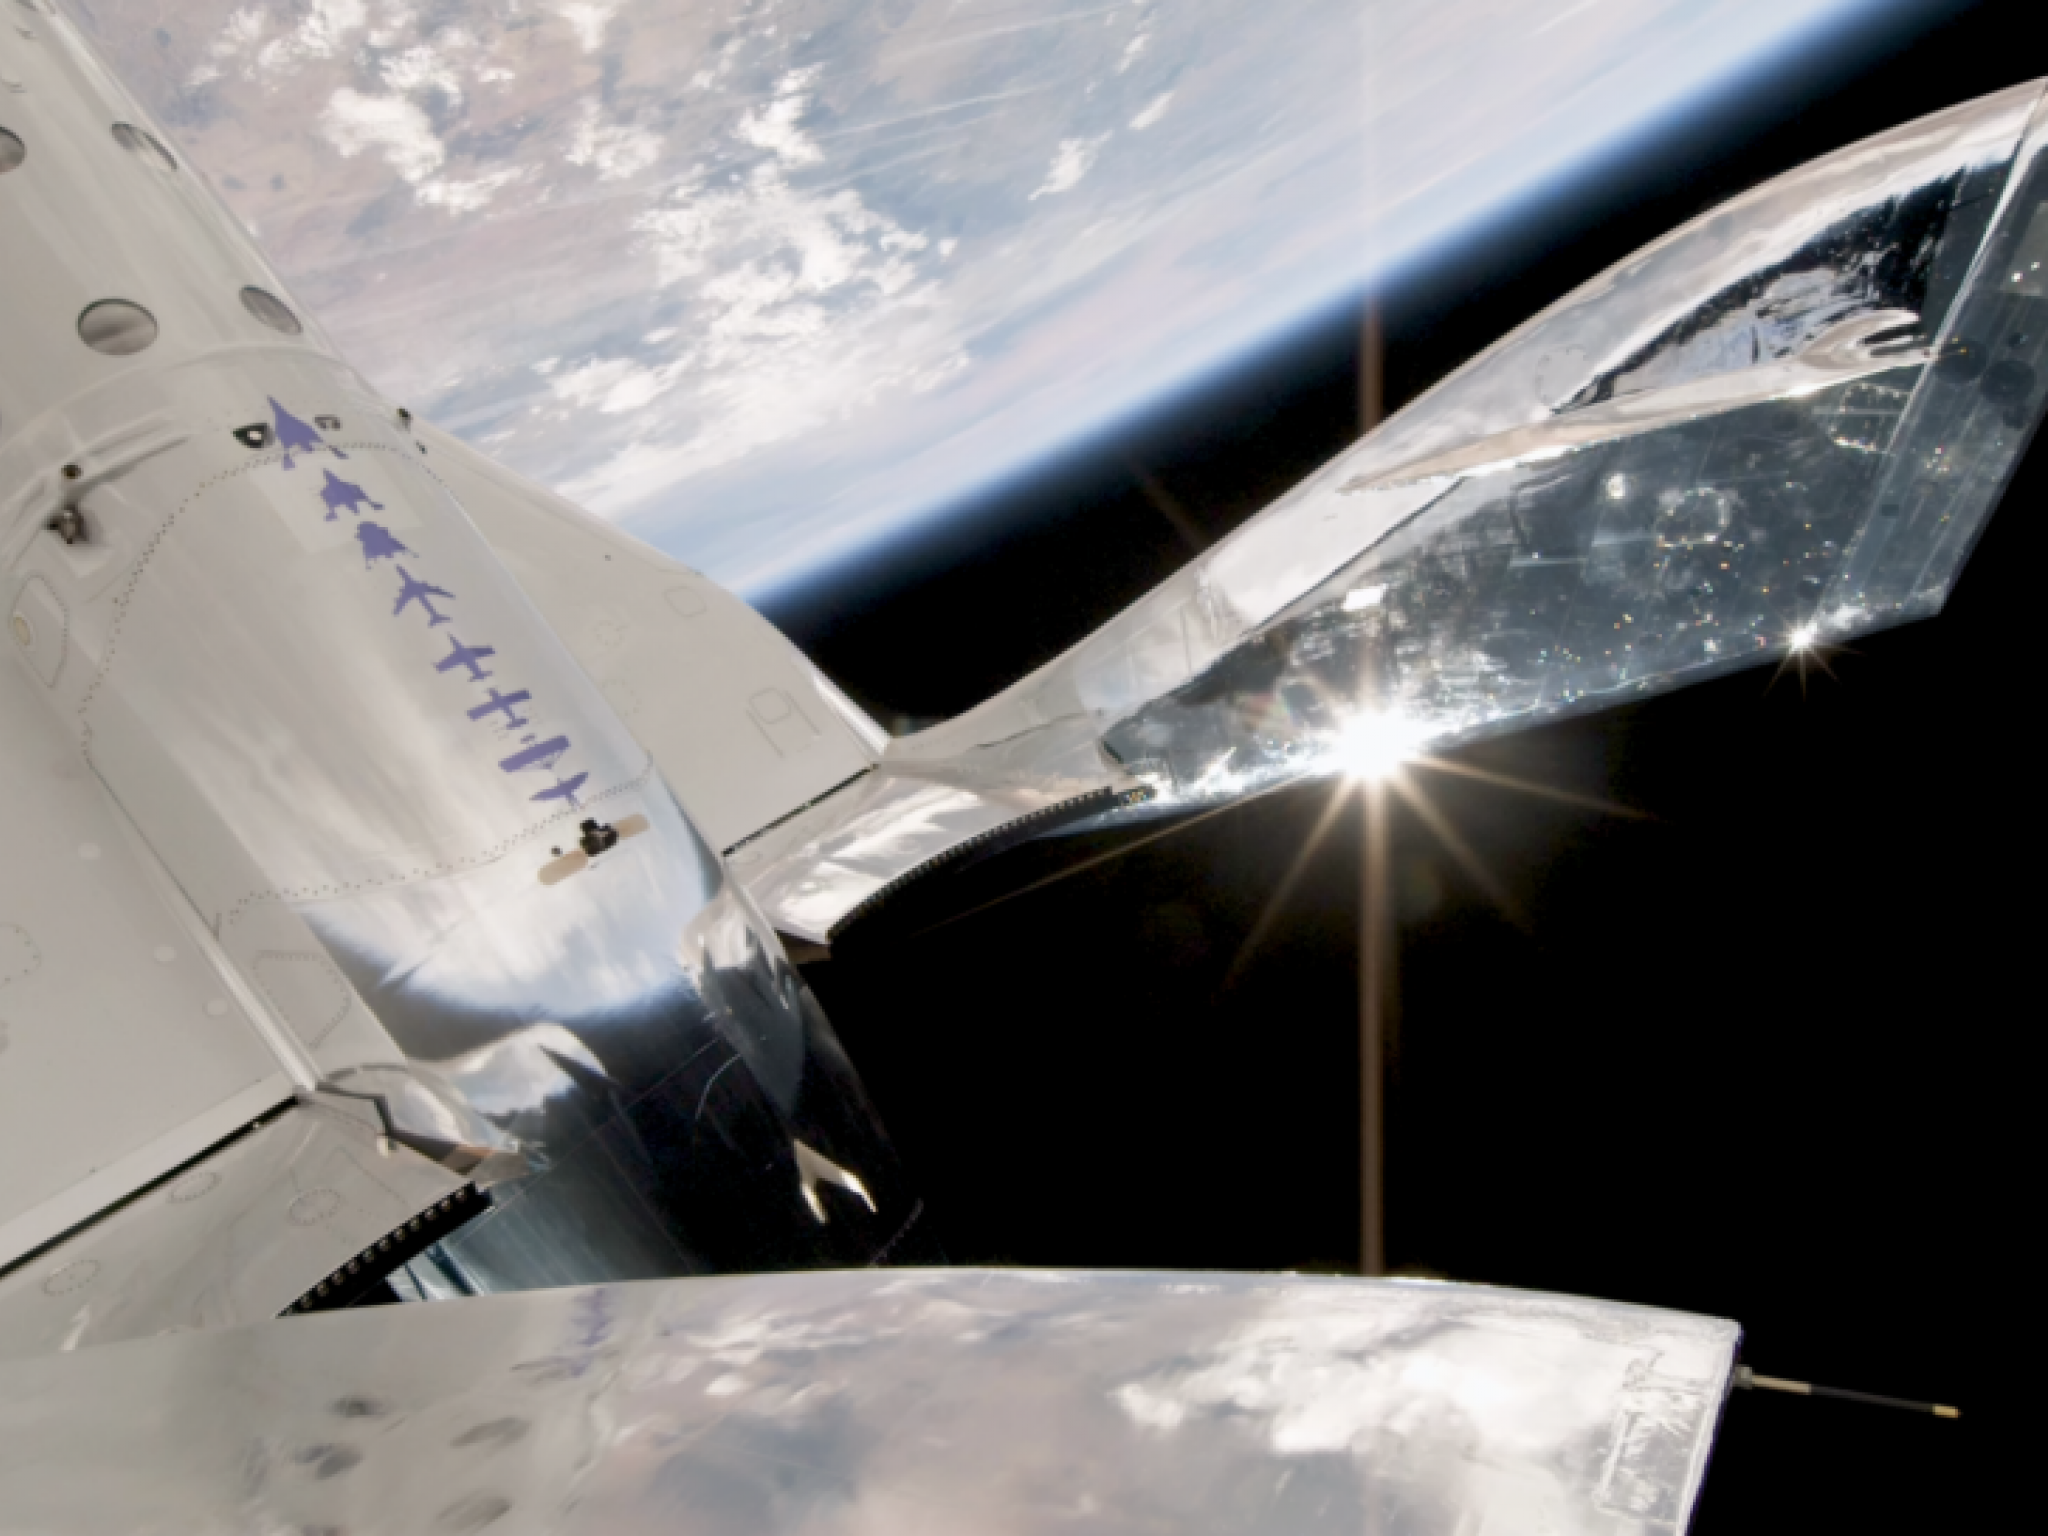  virgin-galactic-shares-traded-lower-tuesday-heres-what-you-need-to-know 